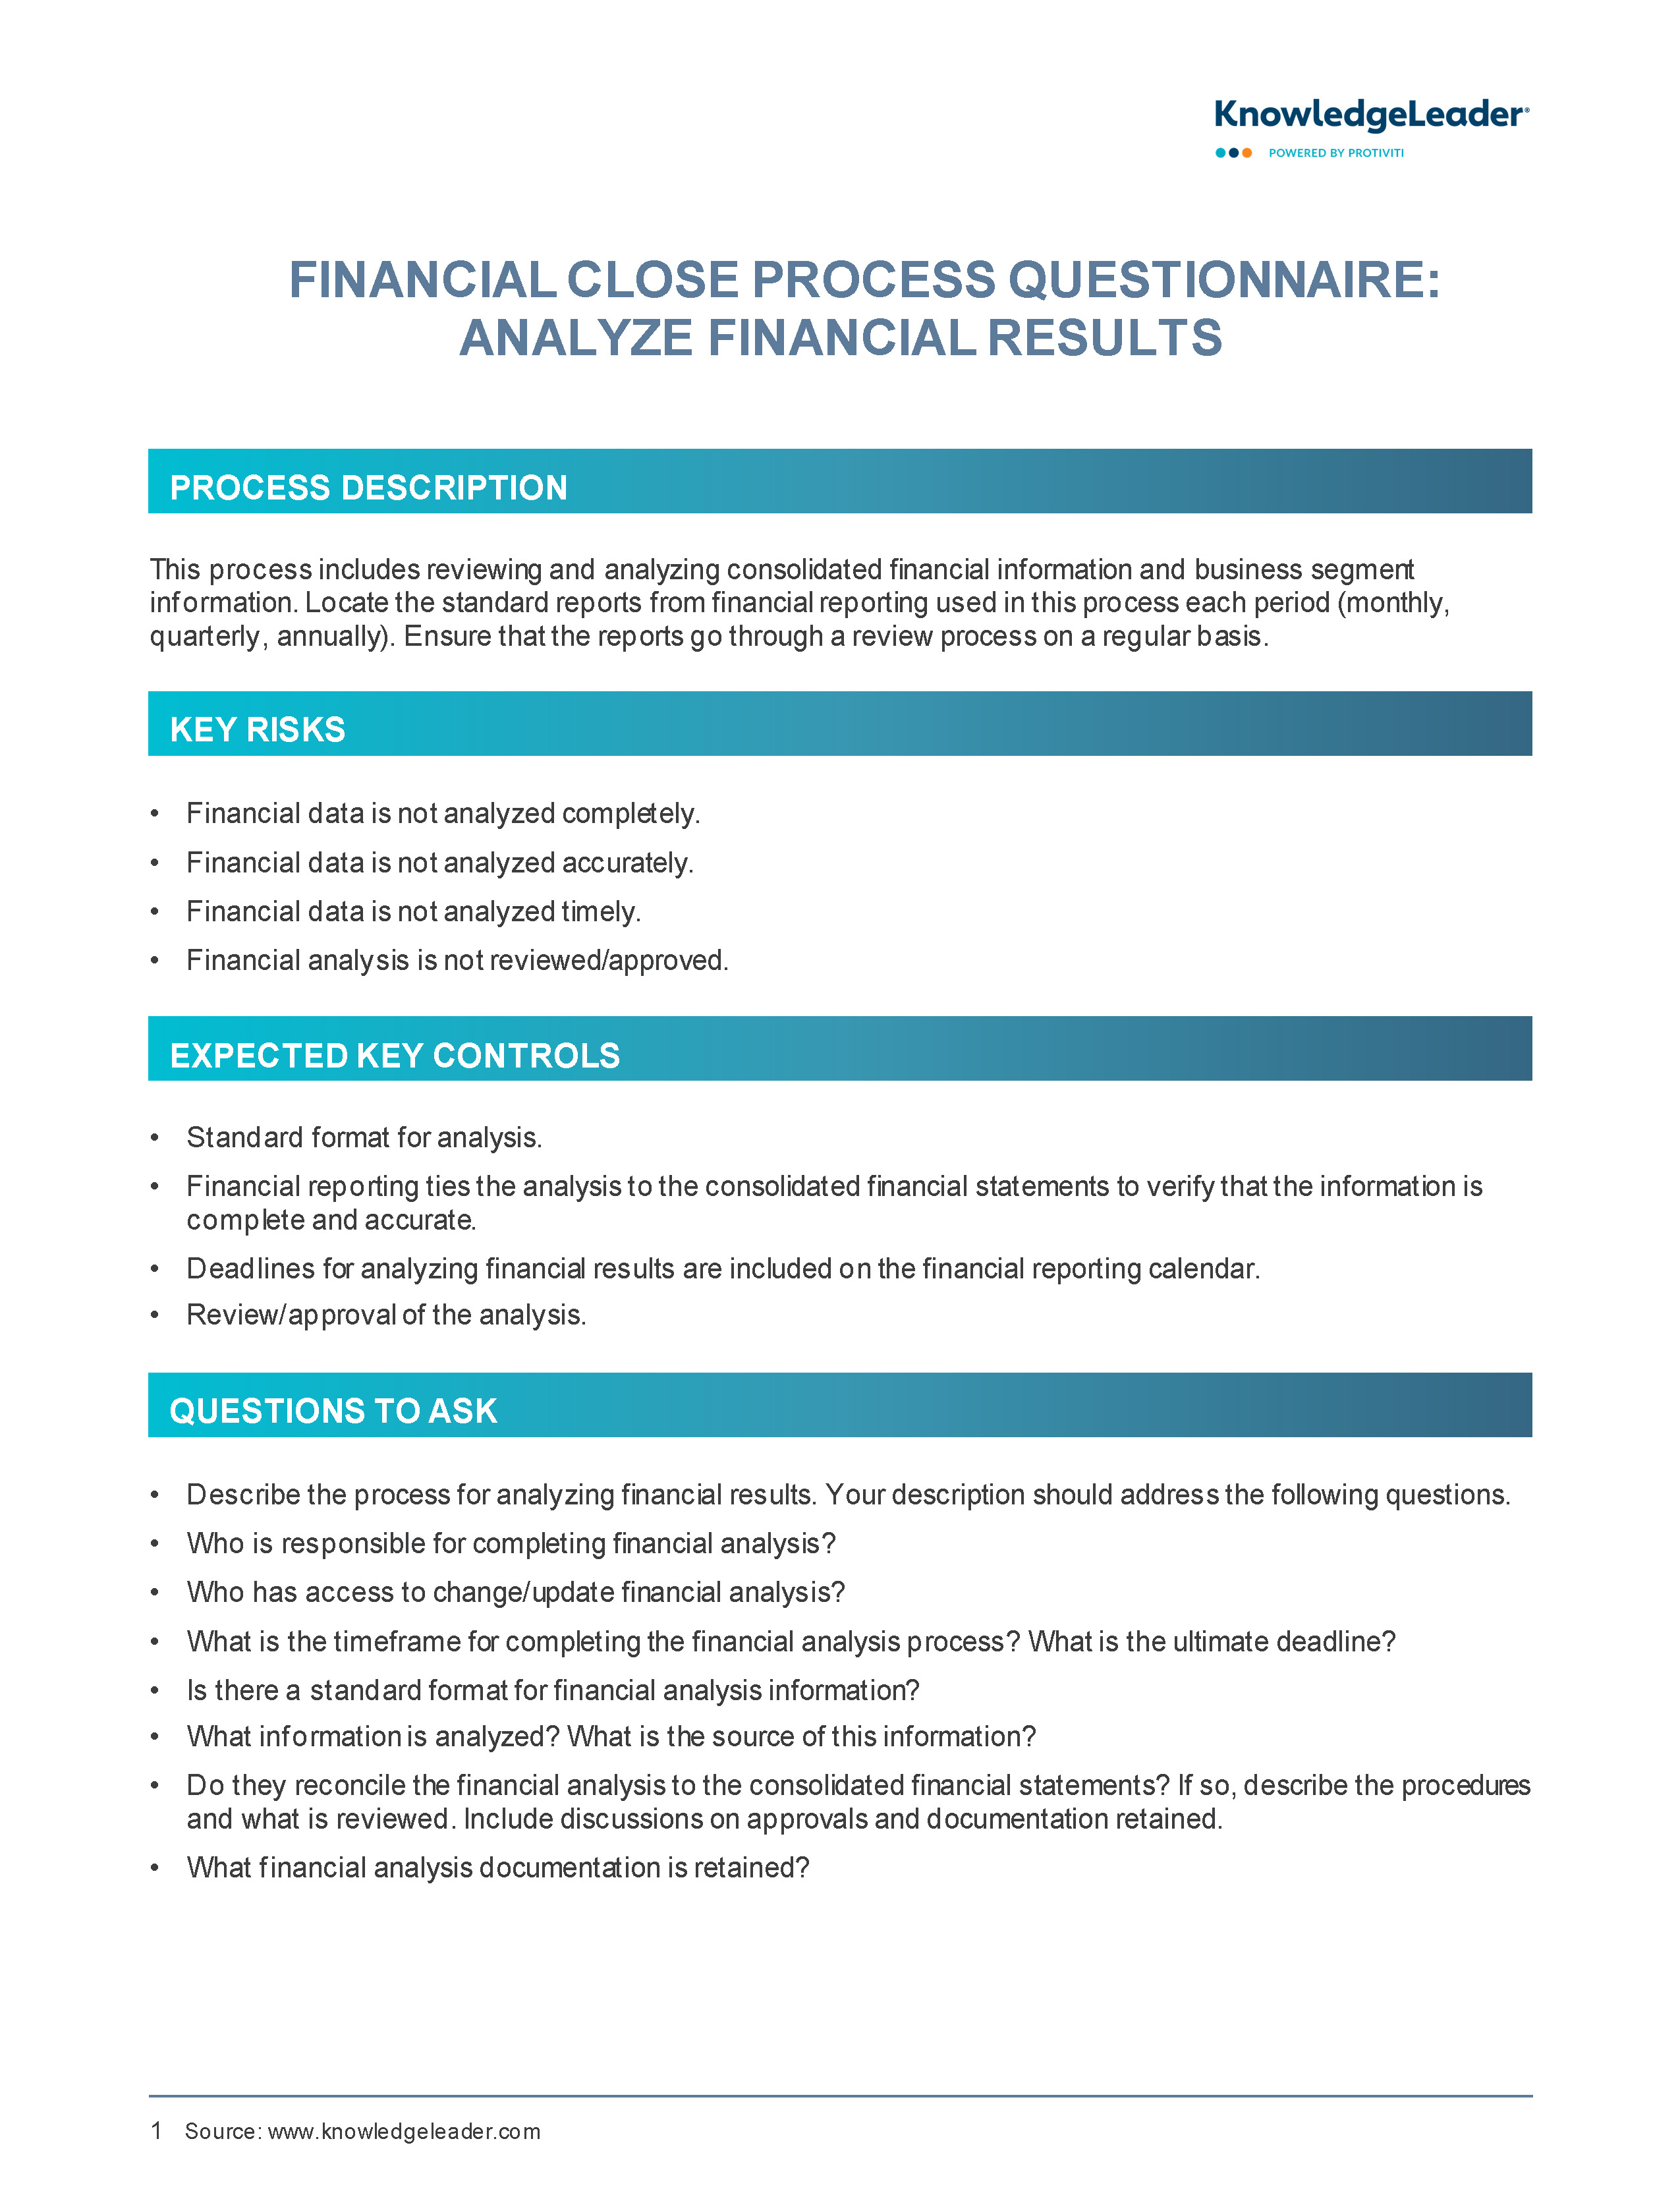 Screenshot of the first page of Financial Close Process Questionnaire - Analyze Financial Results